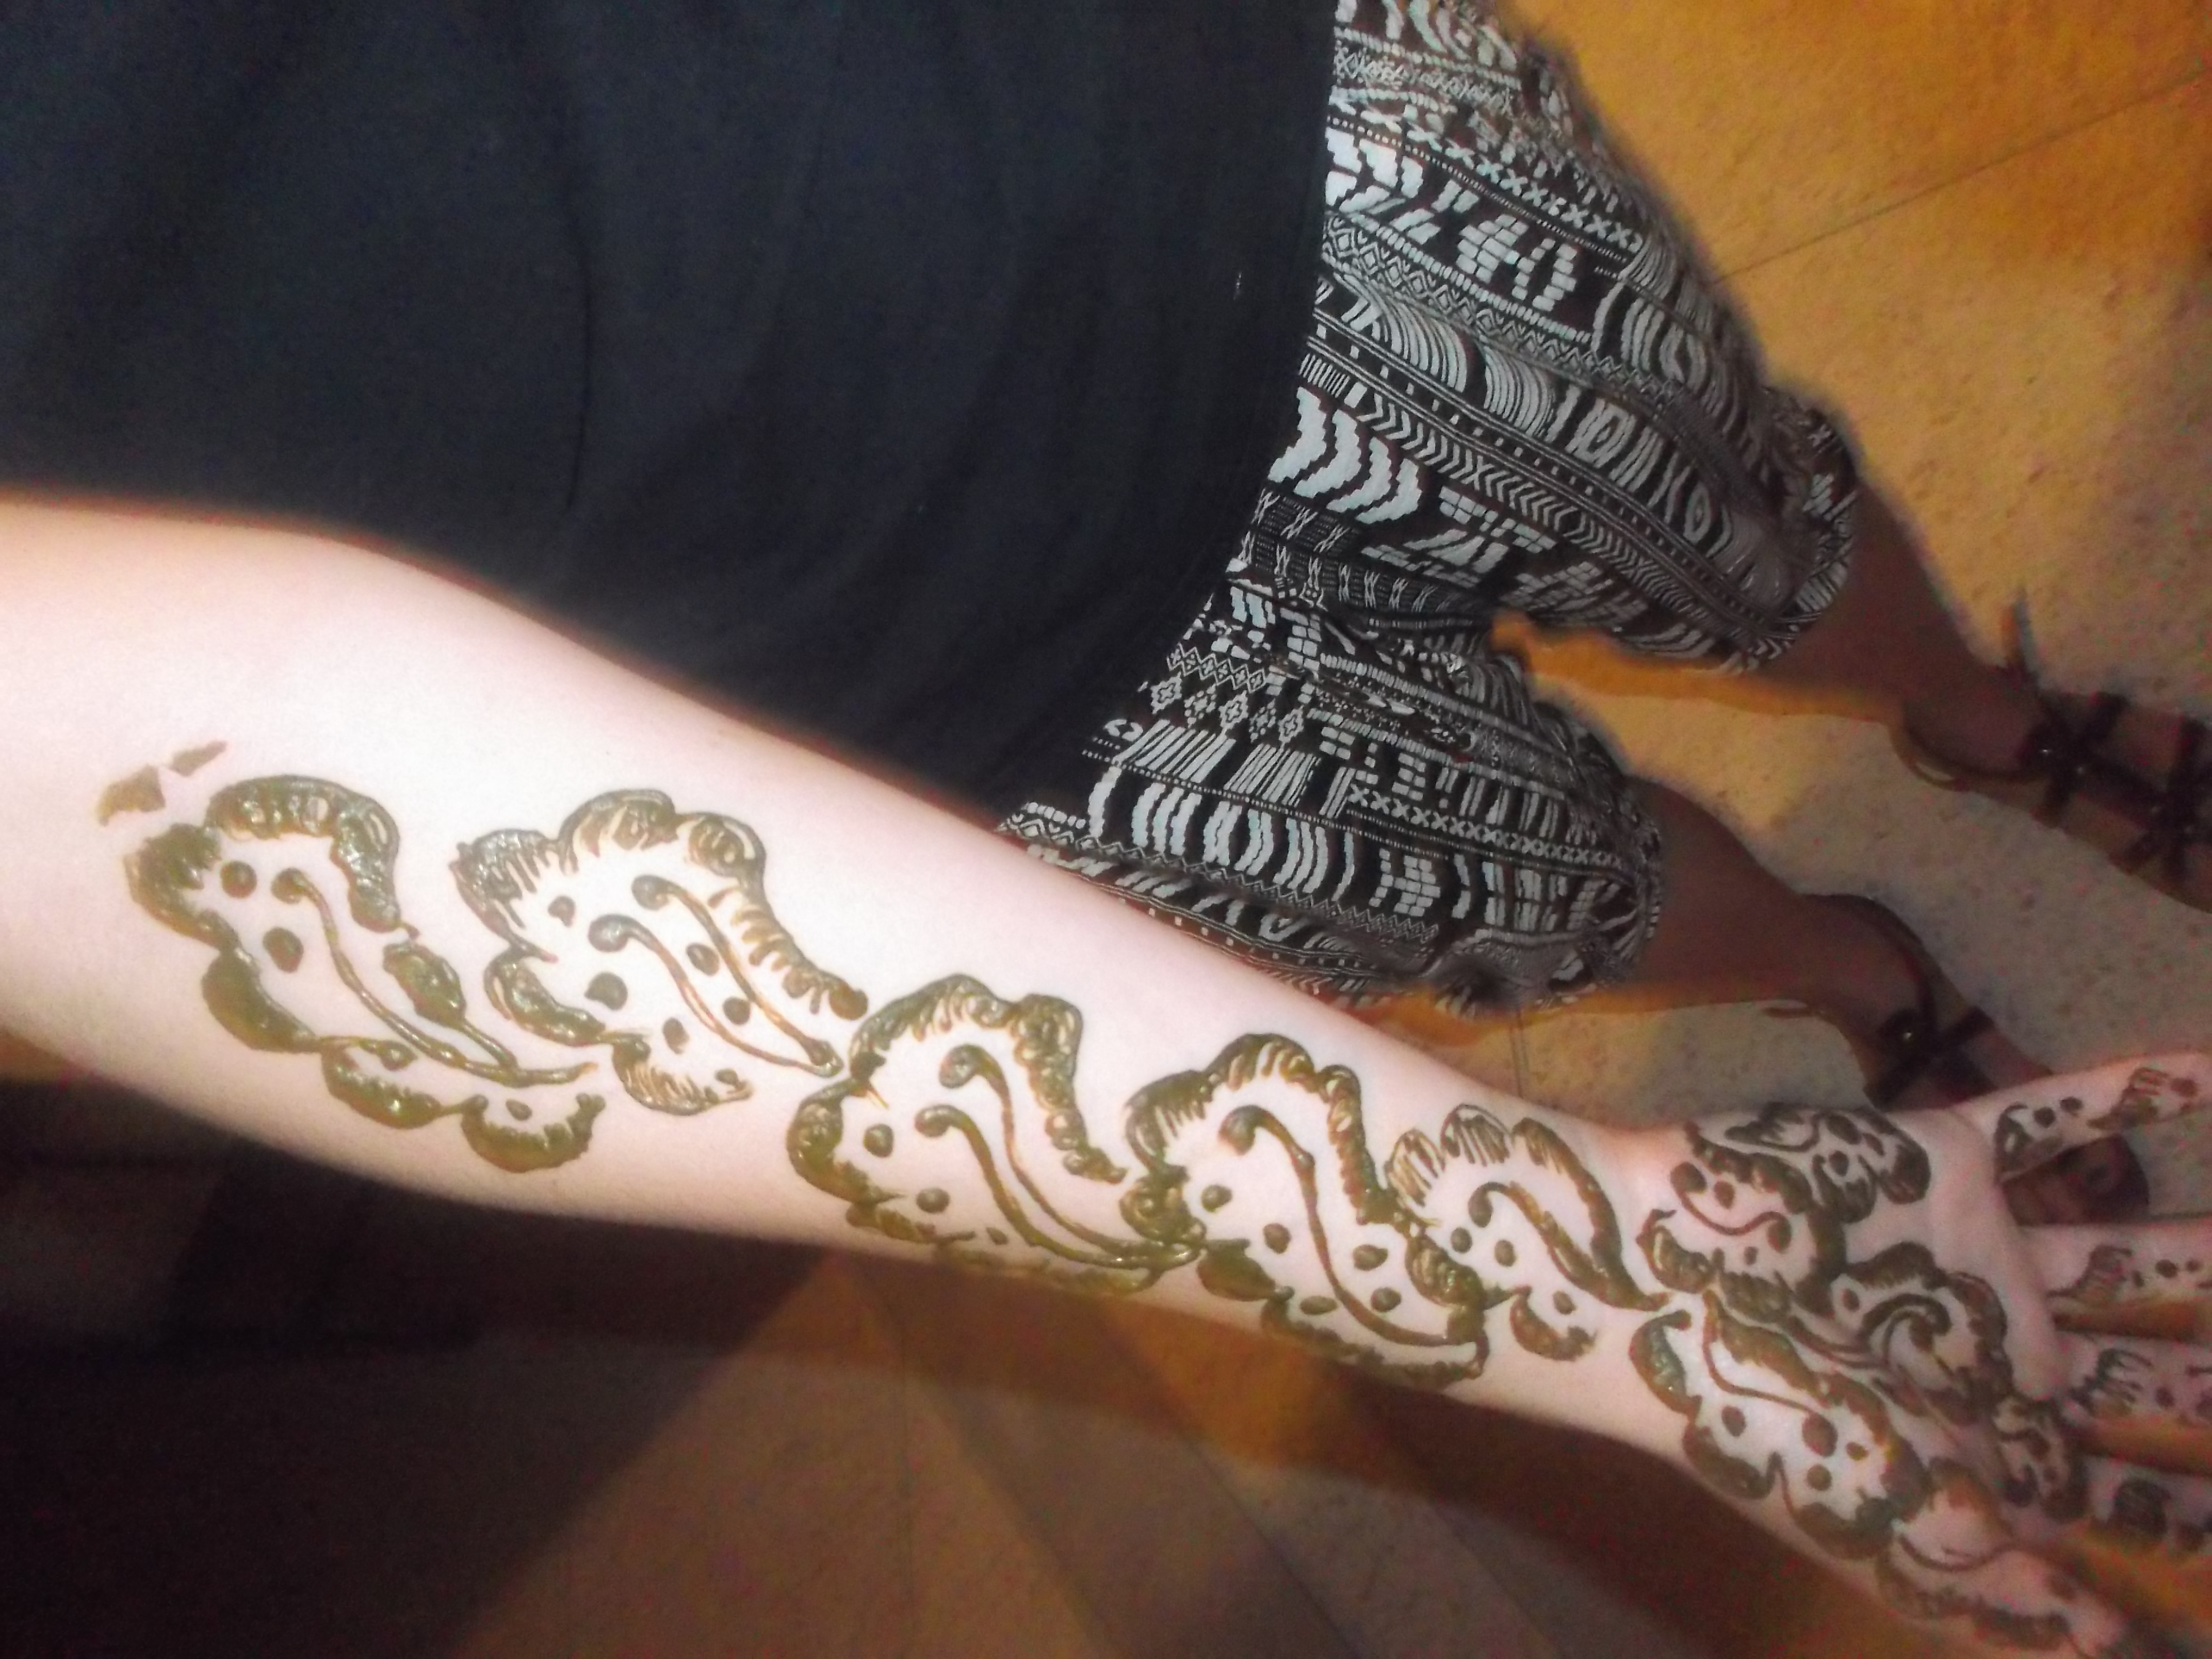 On the last night at the Dar Taliba, one of the girls gave me this gorgeous henna tattoo.